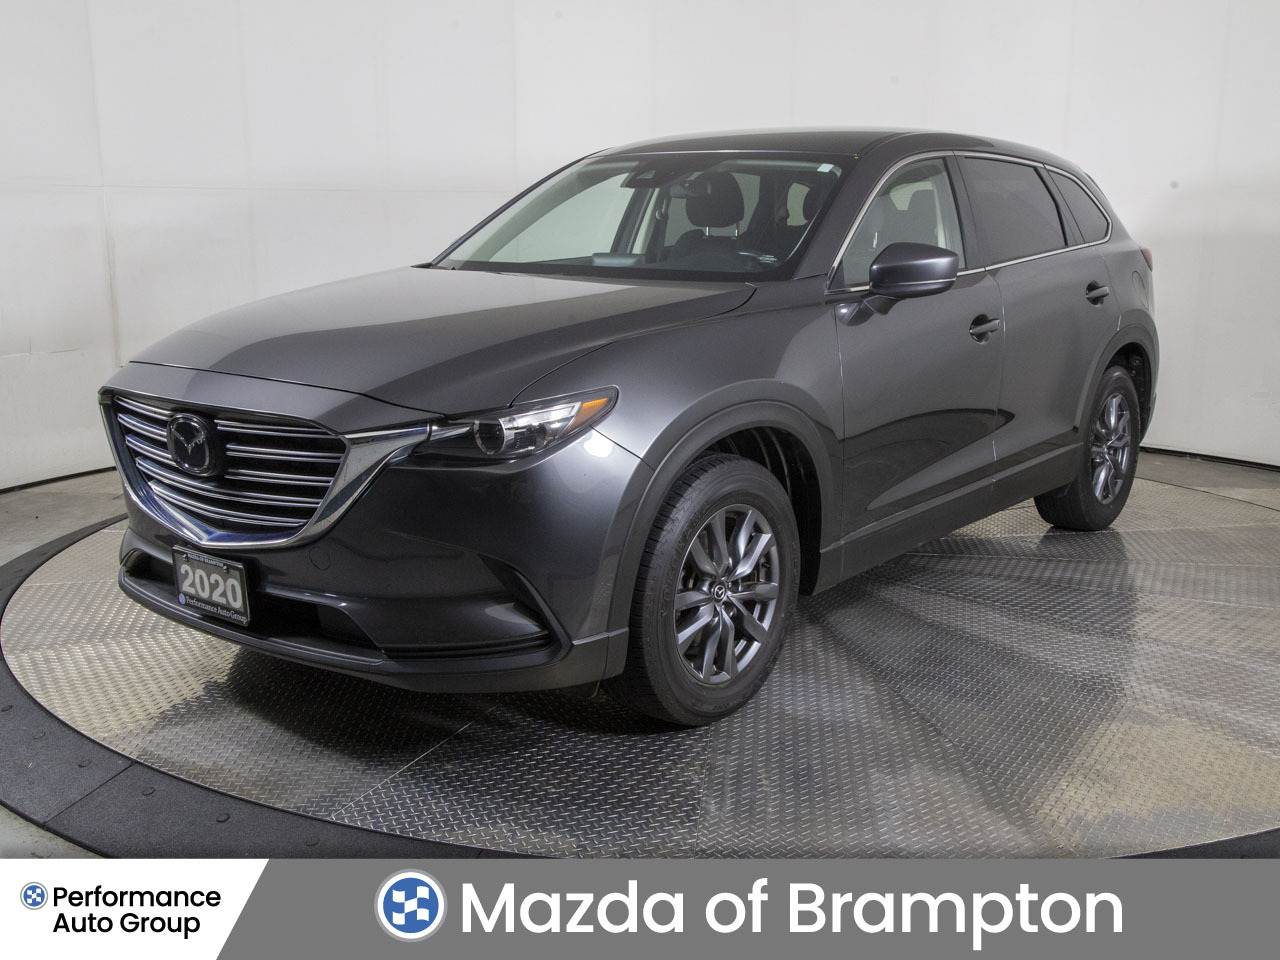 2020 Mazda CX-9 GS AWD HTD SEATS 7 PASSENGER LOW KMS CLEAN CARFAX!